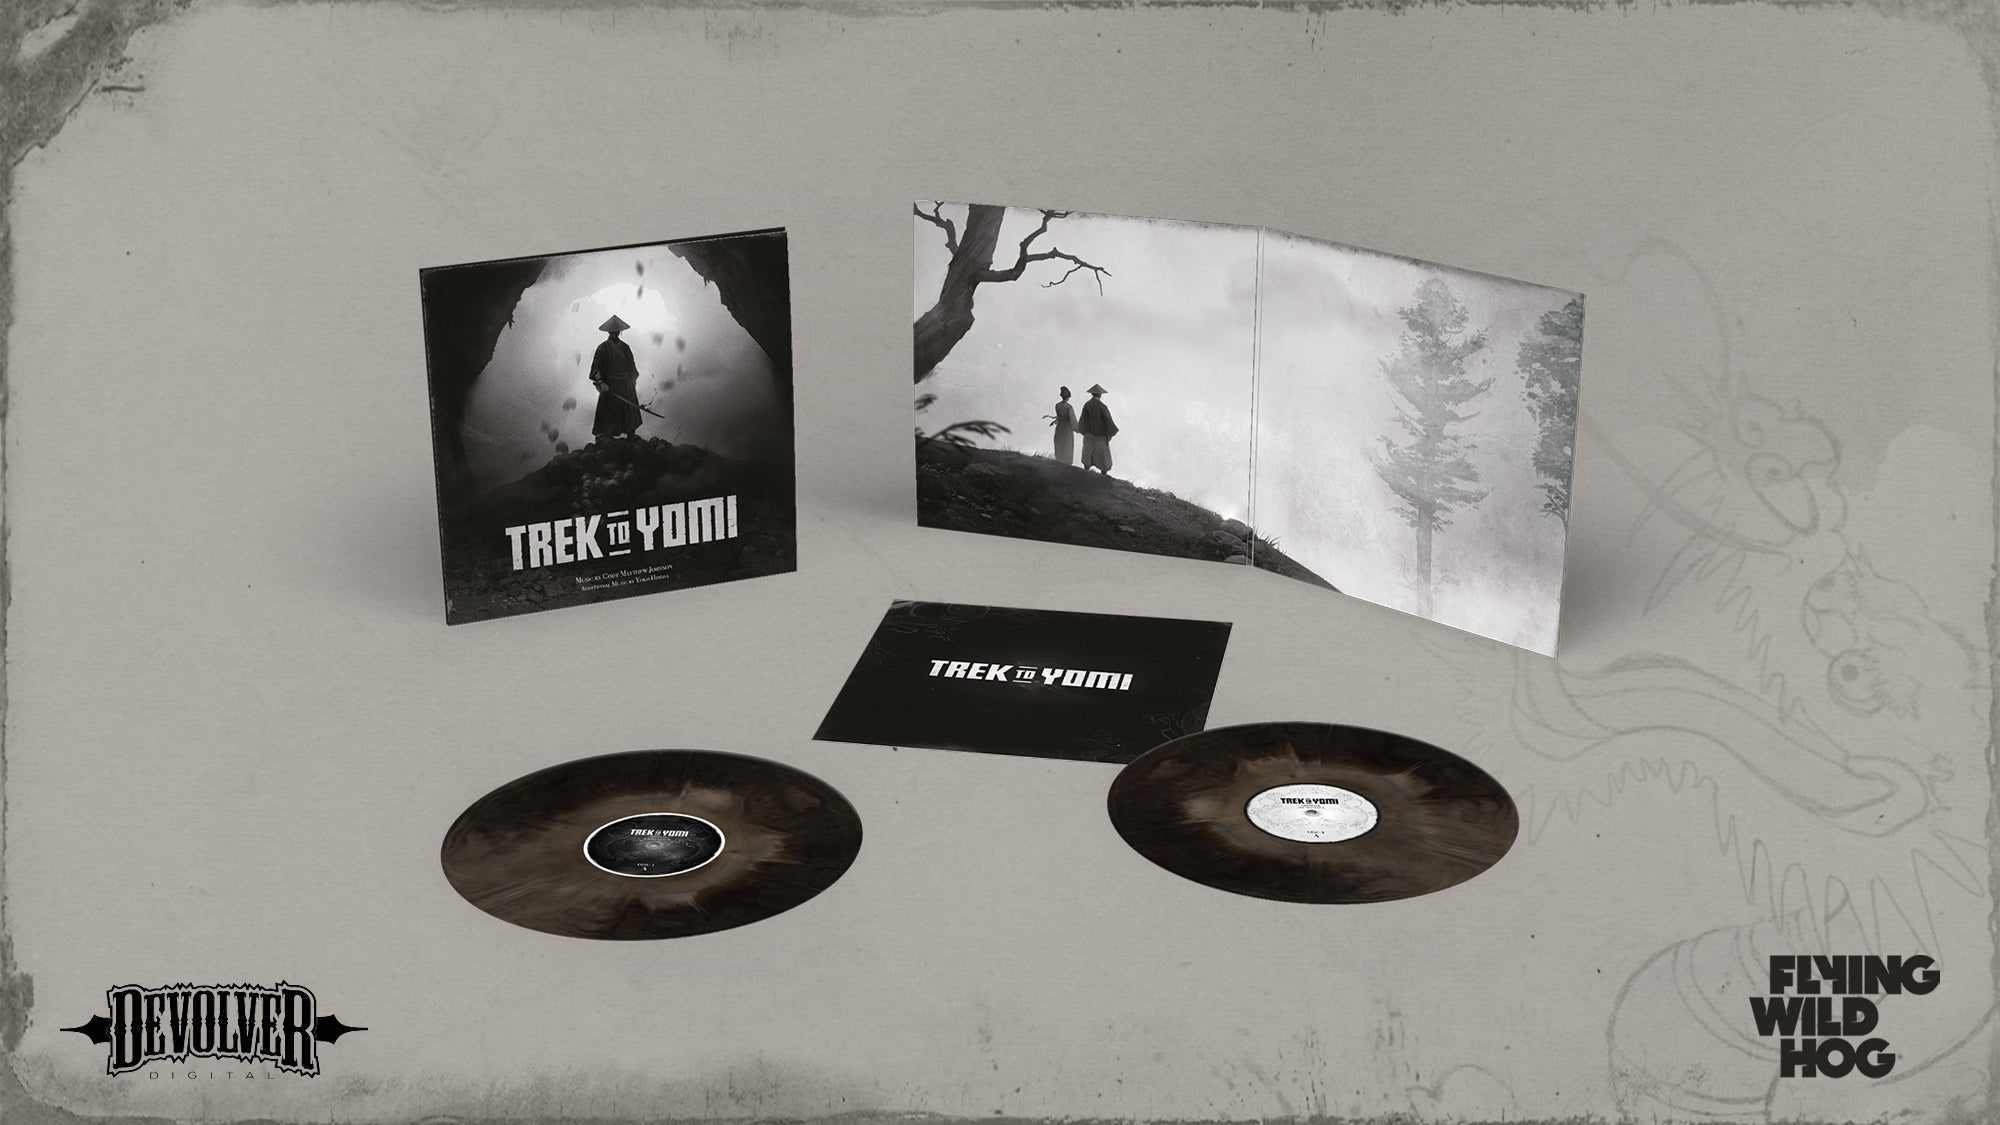 The Trek to Yomi double vinyl by Laced Records with grey and black discs, available via the Devolver merch store.